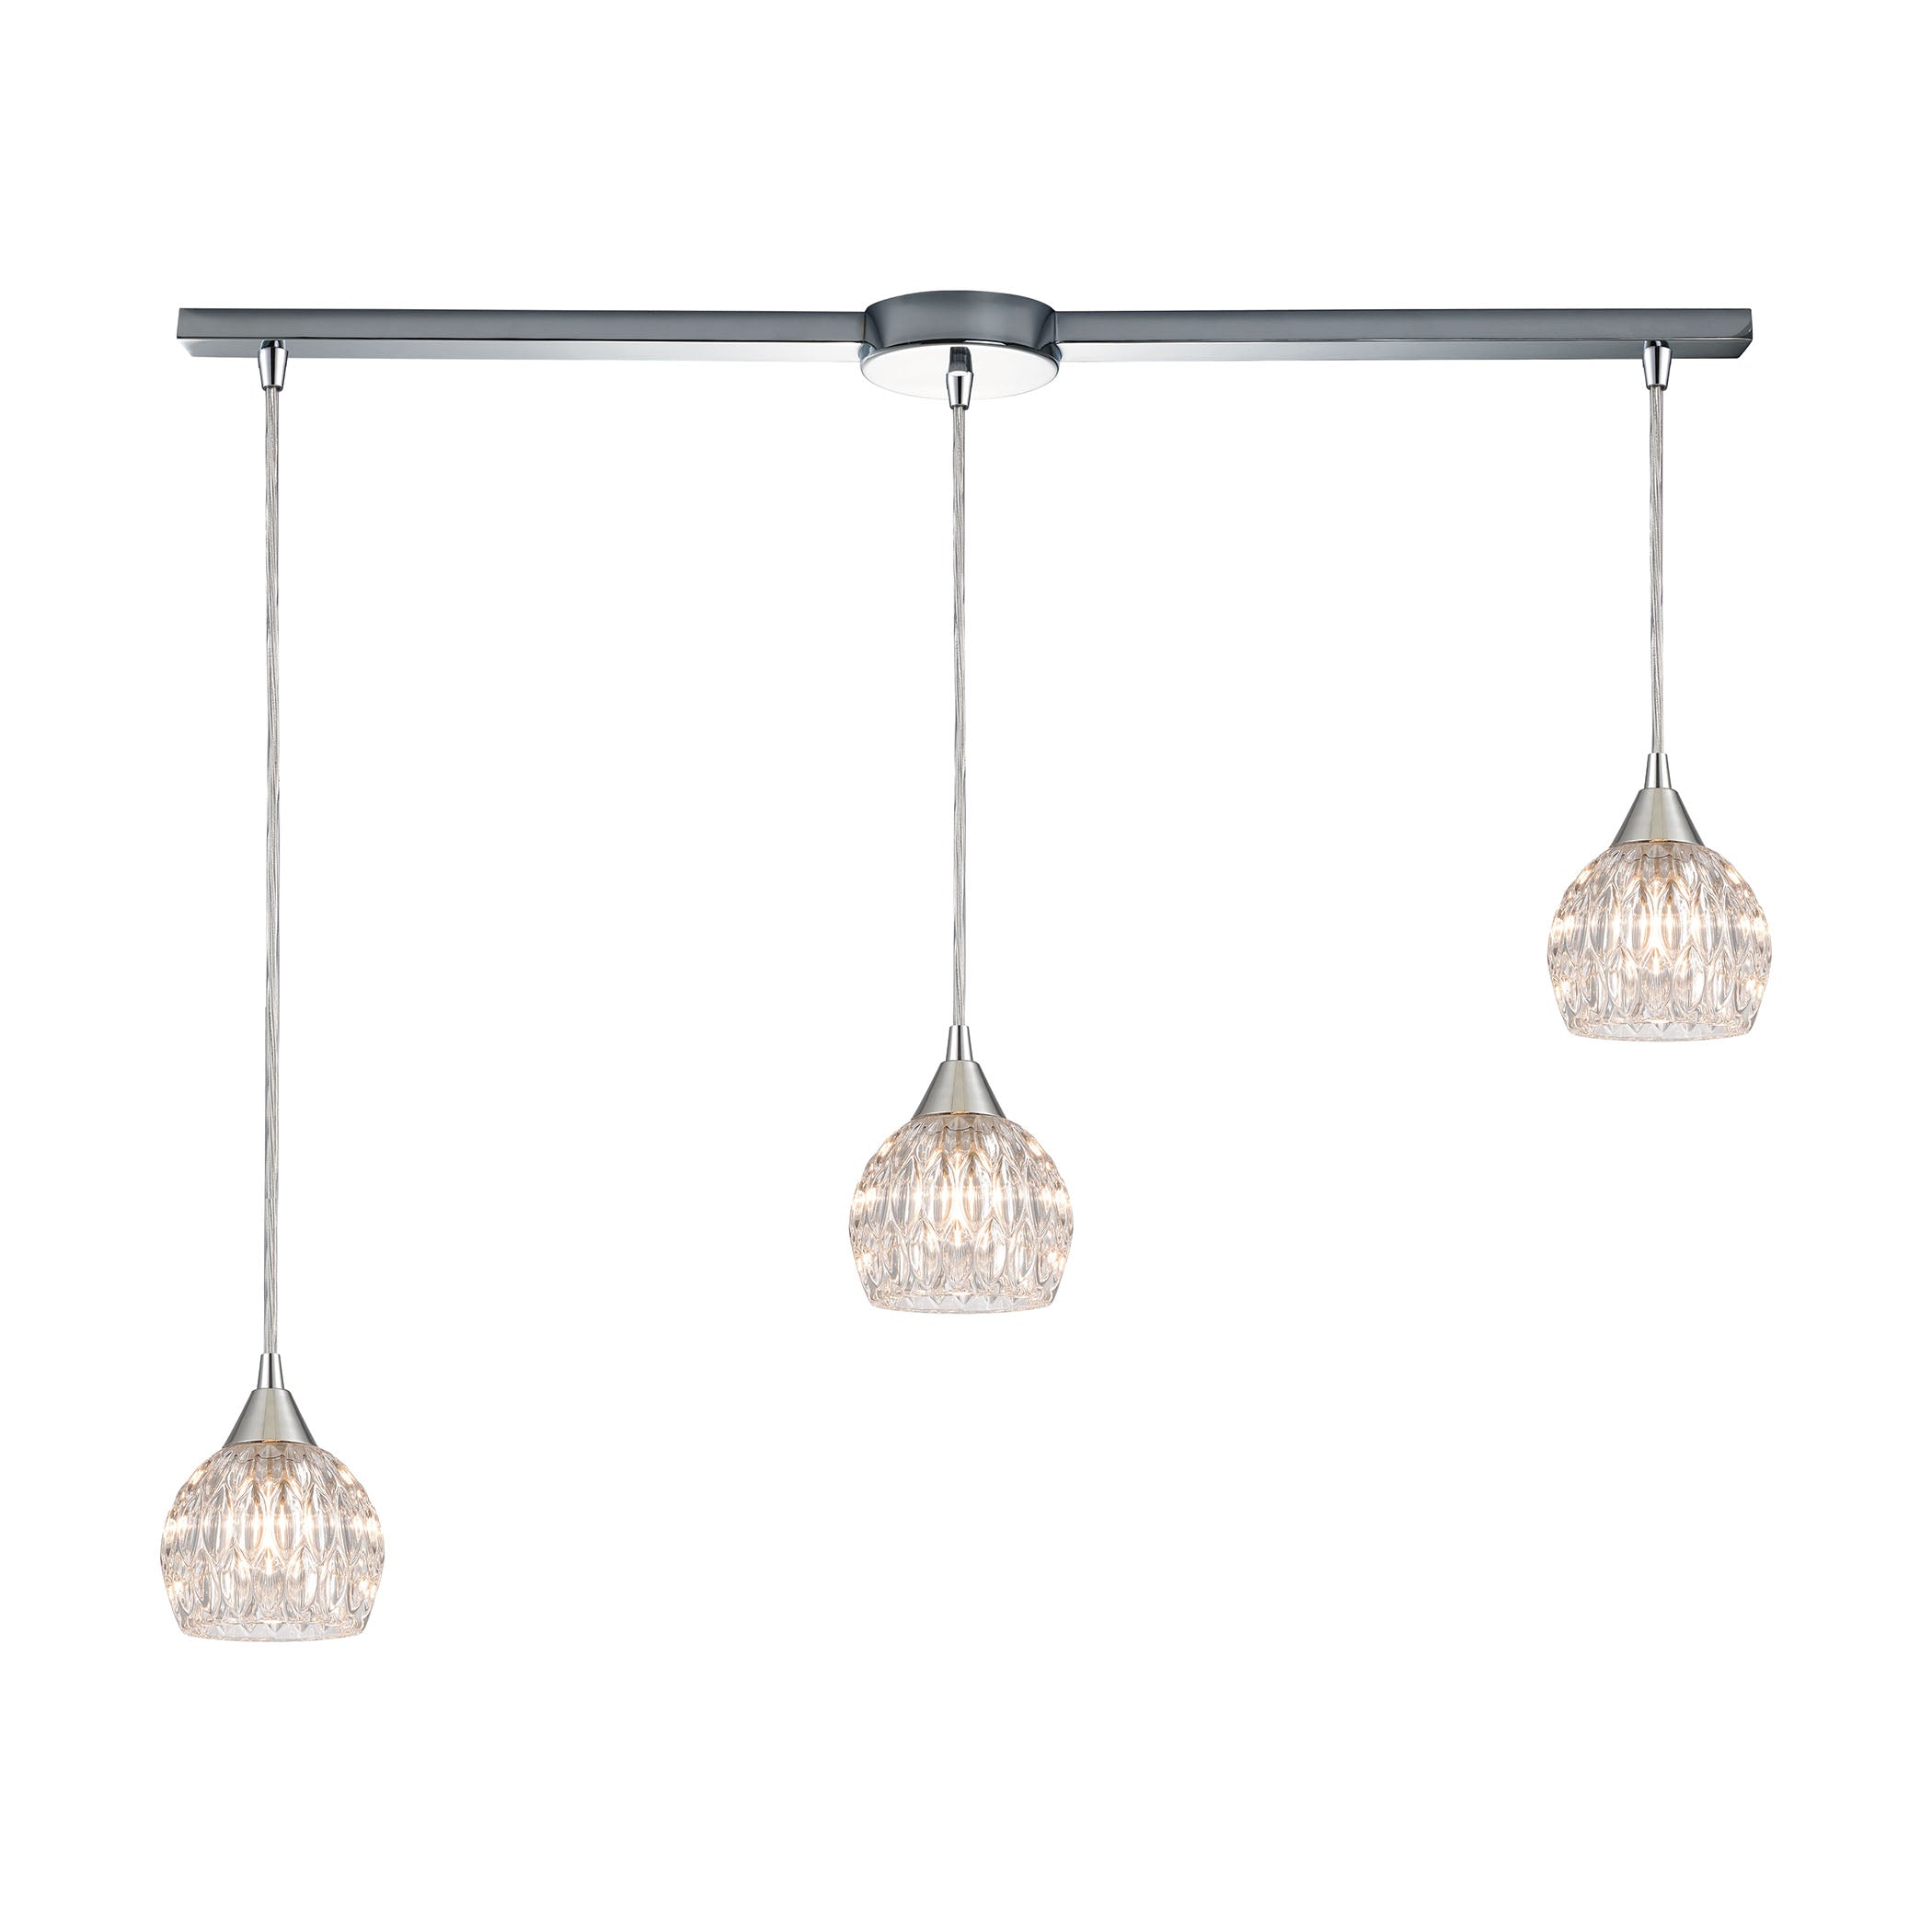 ELK Lighting 10824/3L Kersey 3-Light Linear Mini Pendant Fixture in Polished Chrome with Clear Crystal